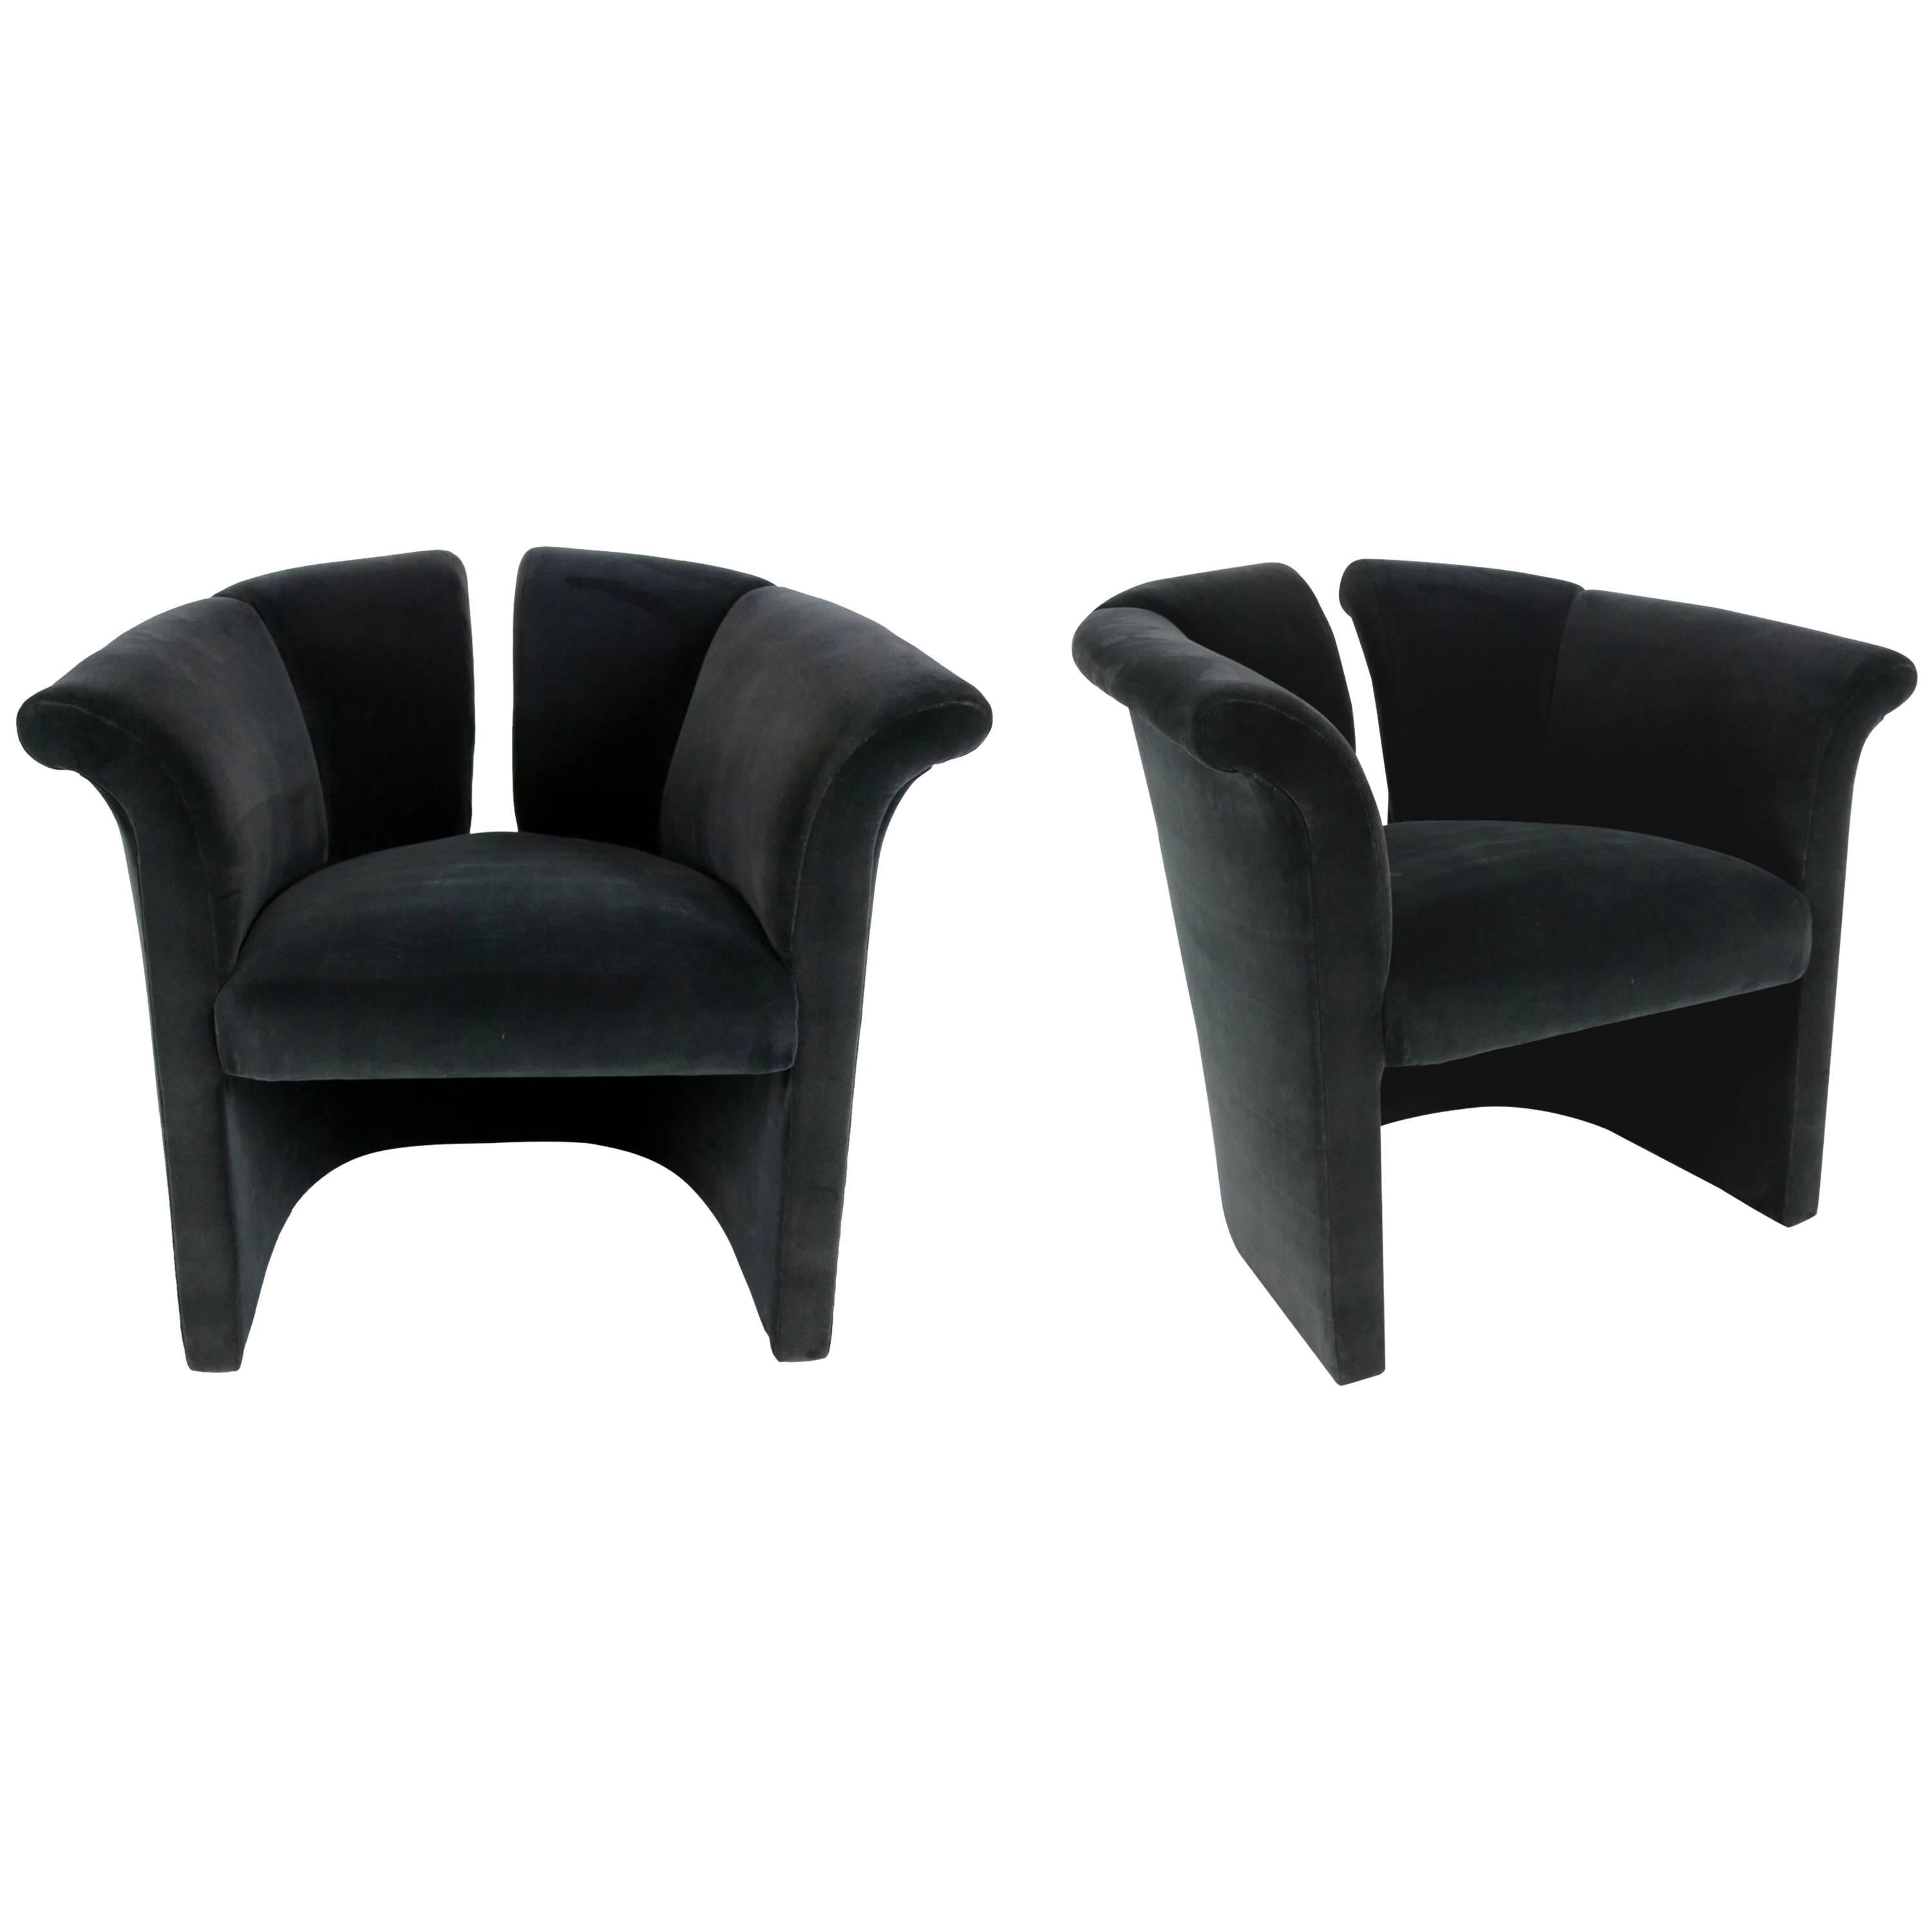 Pair of Deco Revival Lounge Chairs by Milo Baughman for Thayer Coggin